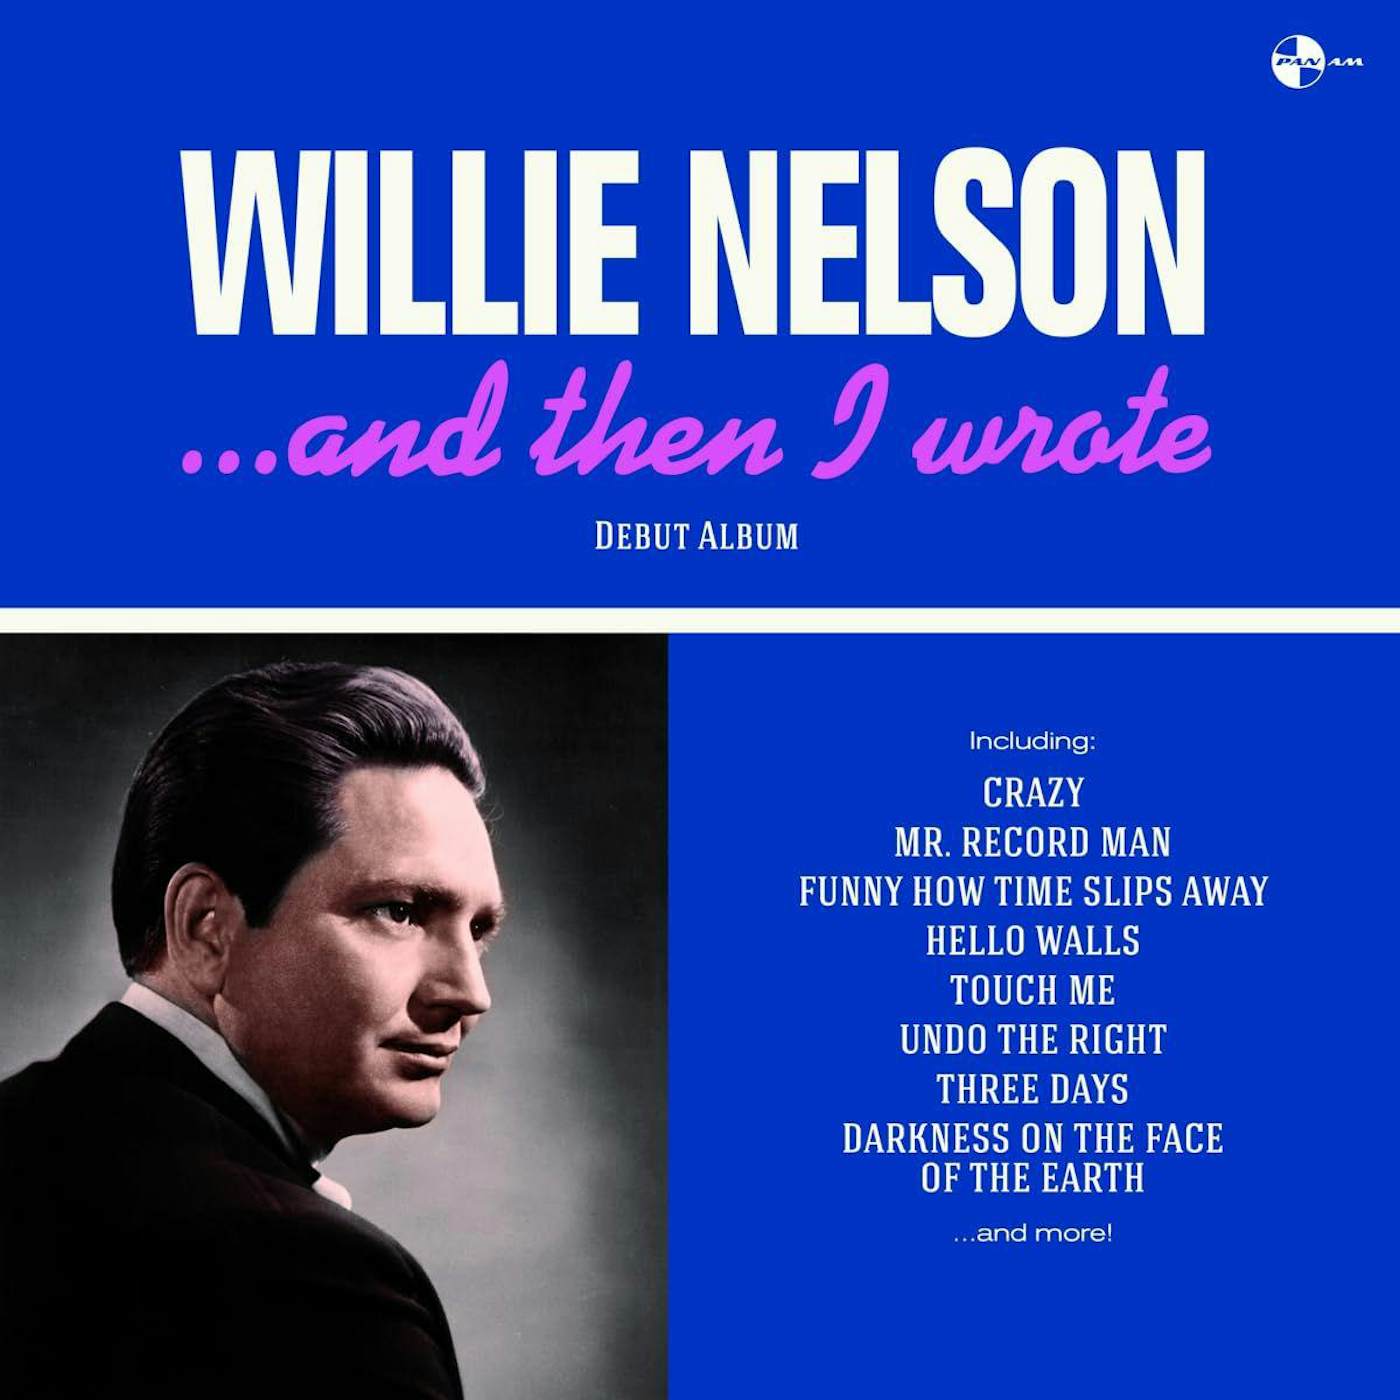 Willie Nelson And Then I Wrote Vinyl Record